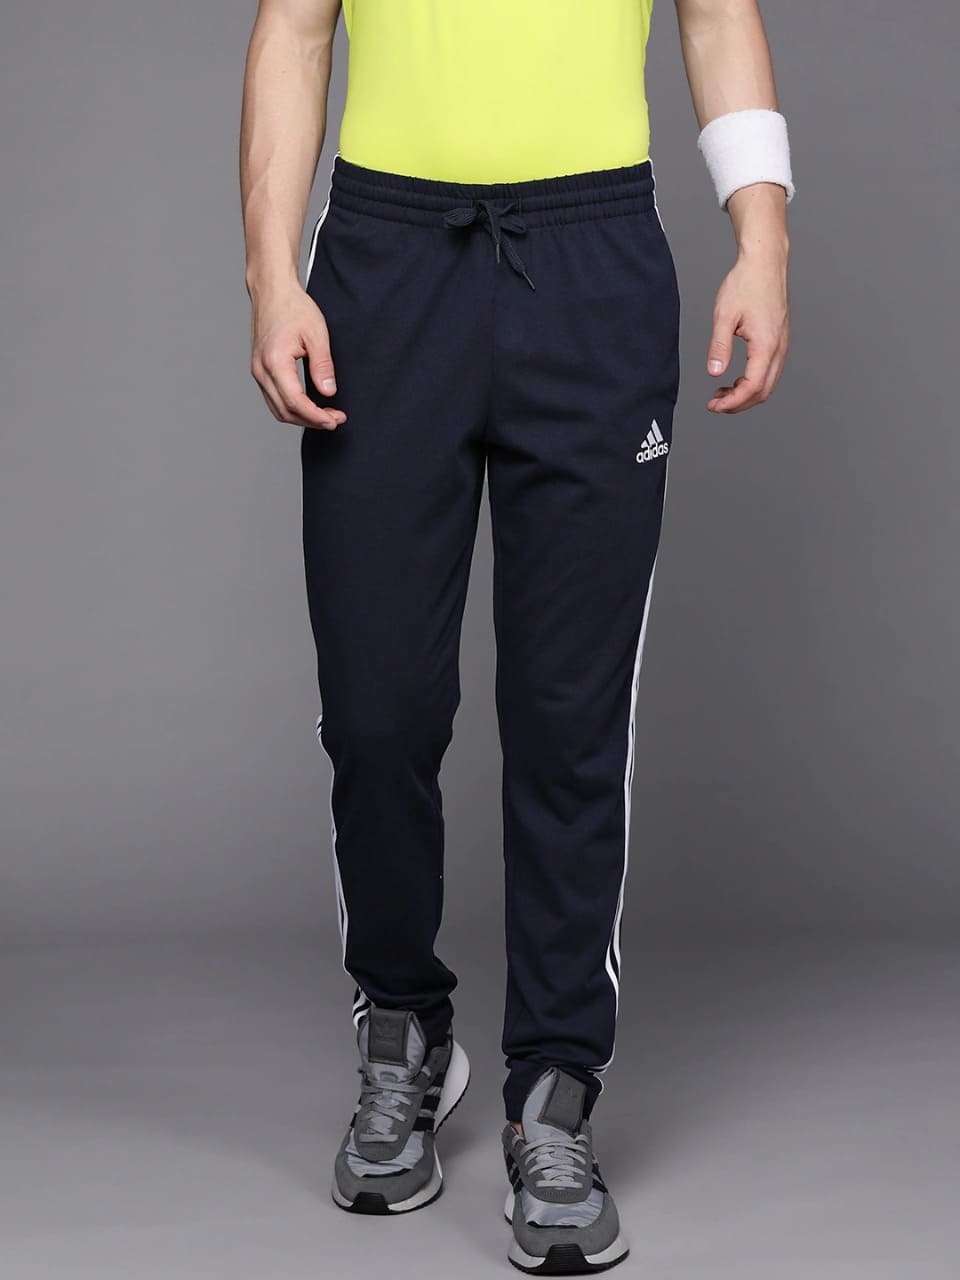 Men Black and Blue Track Pants combo pack of 2 – The Indian Rang